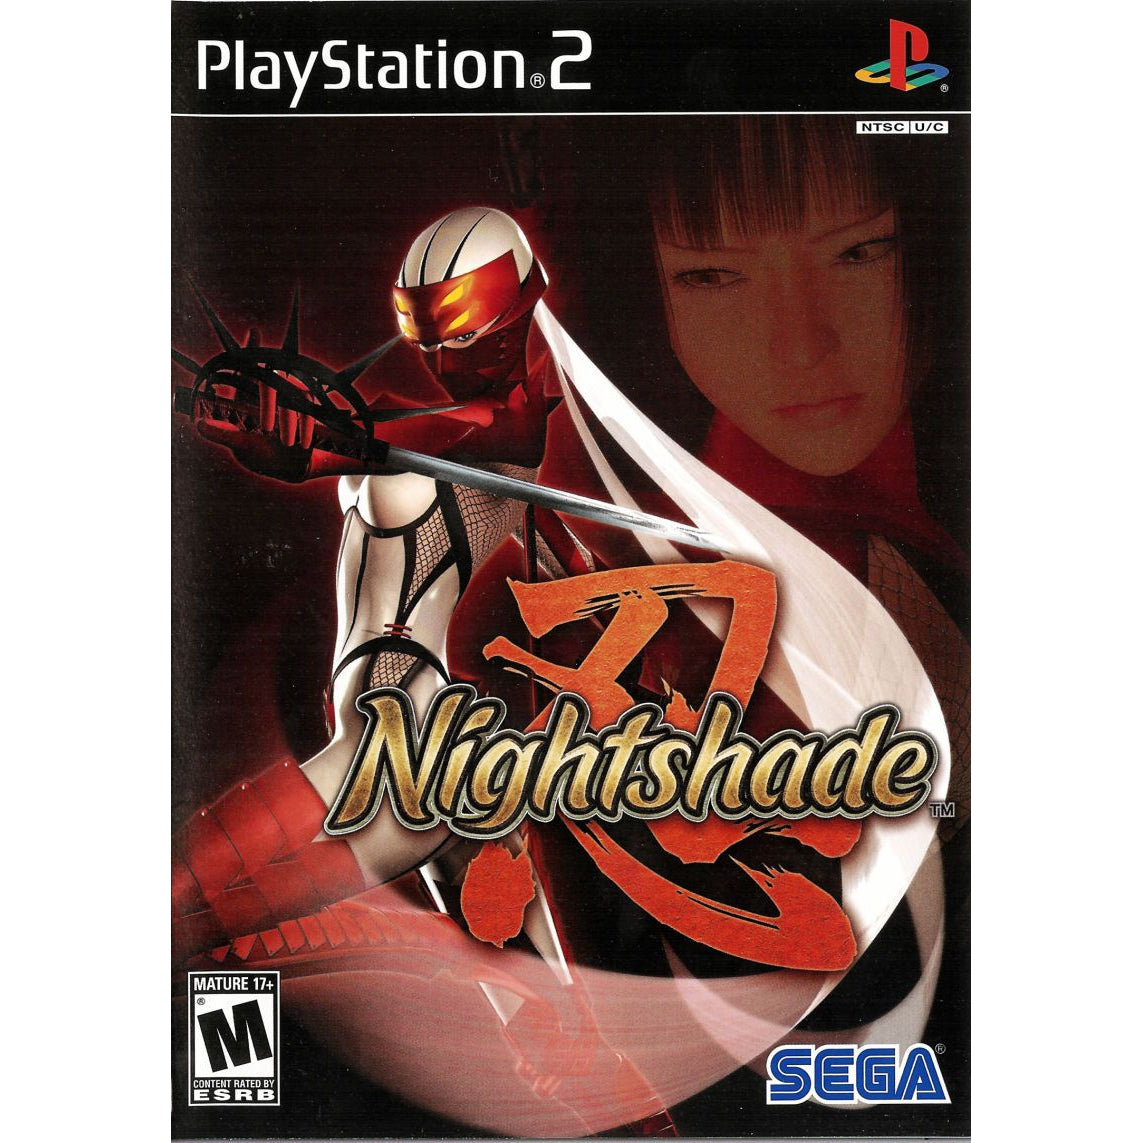 Nightshade - PlayStation 2 (PS2) Game Complete - YourGamingShop.com - Buy, Sell, Trade Video Games Online. 120 Day Warranty. Satisfaction Guaranteed.